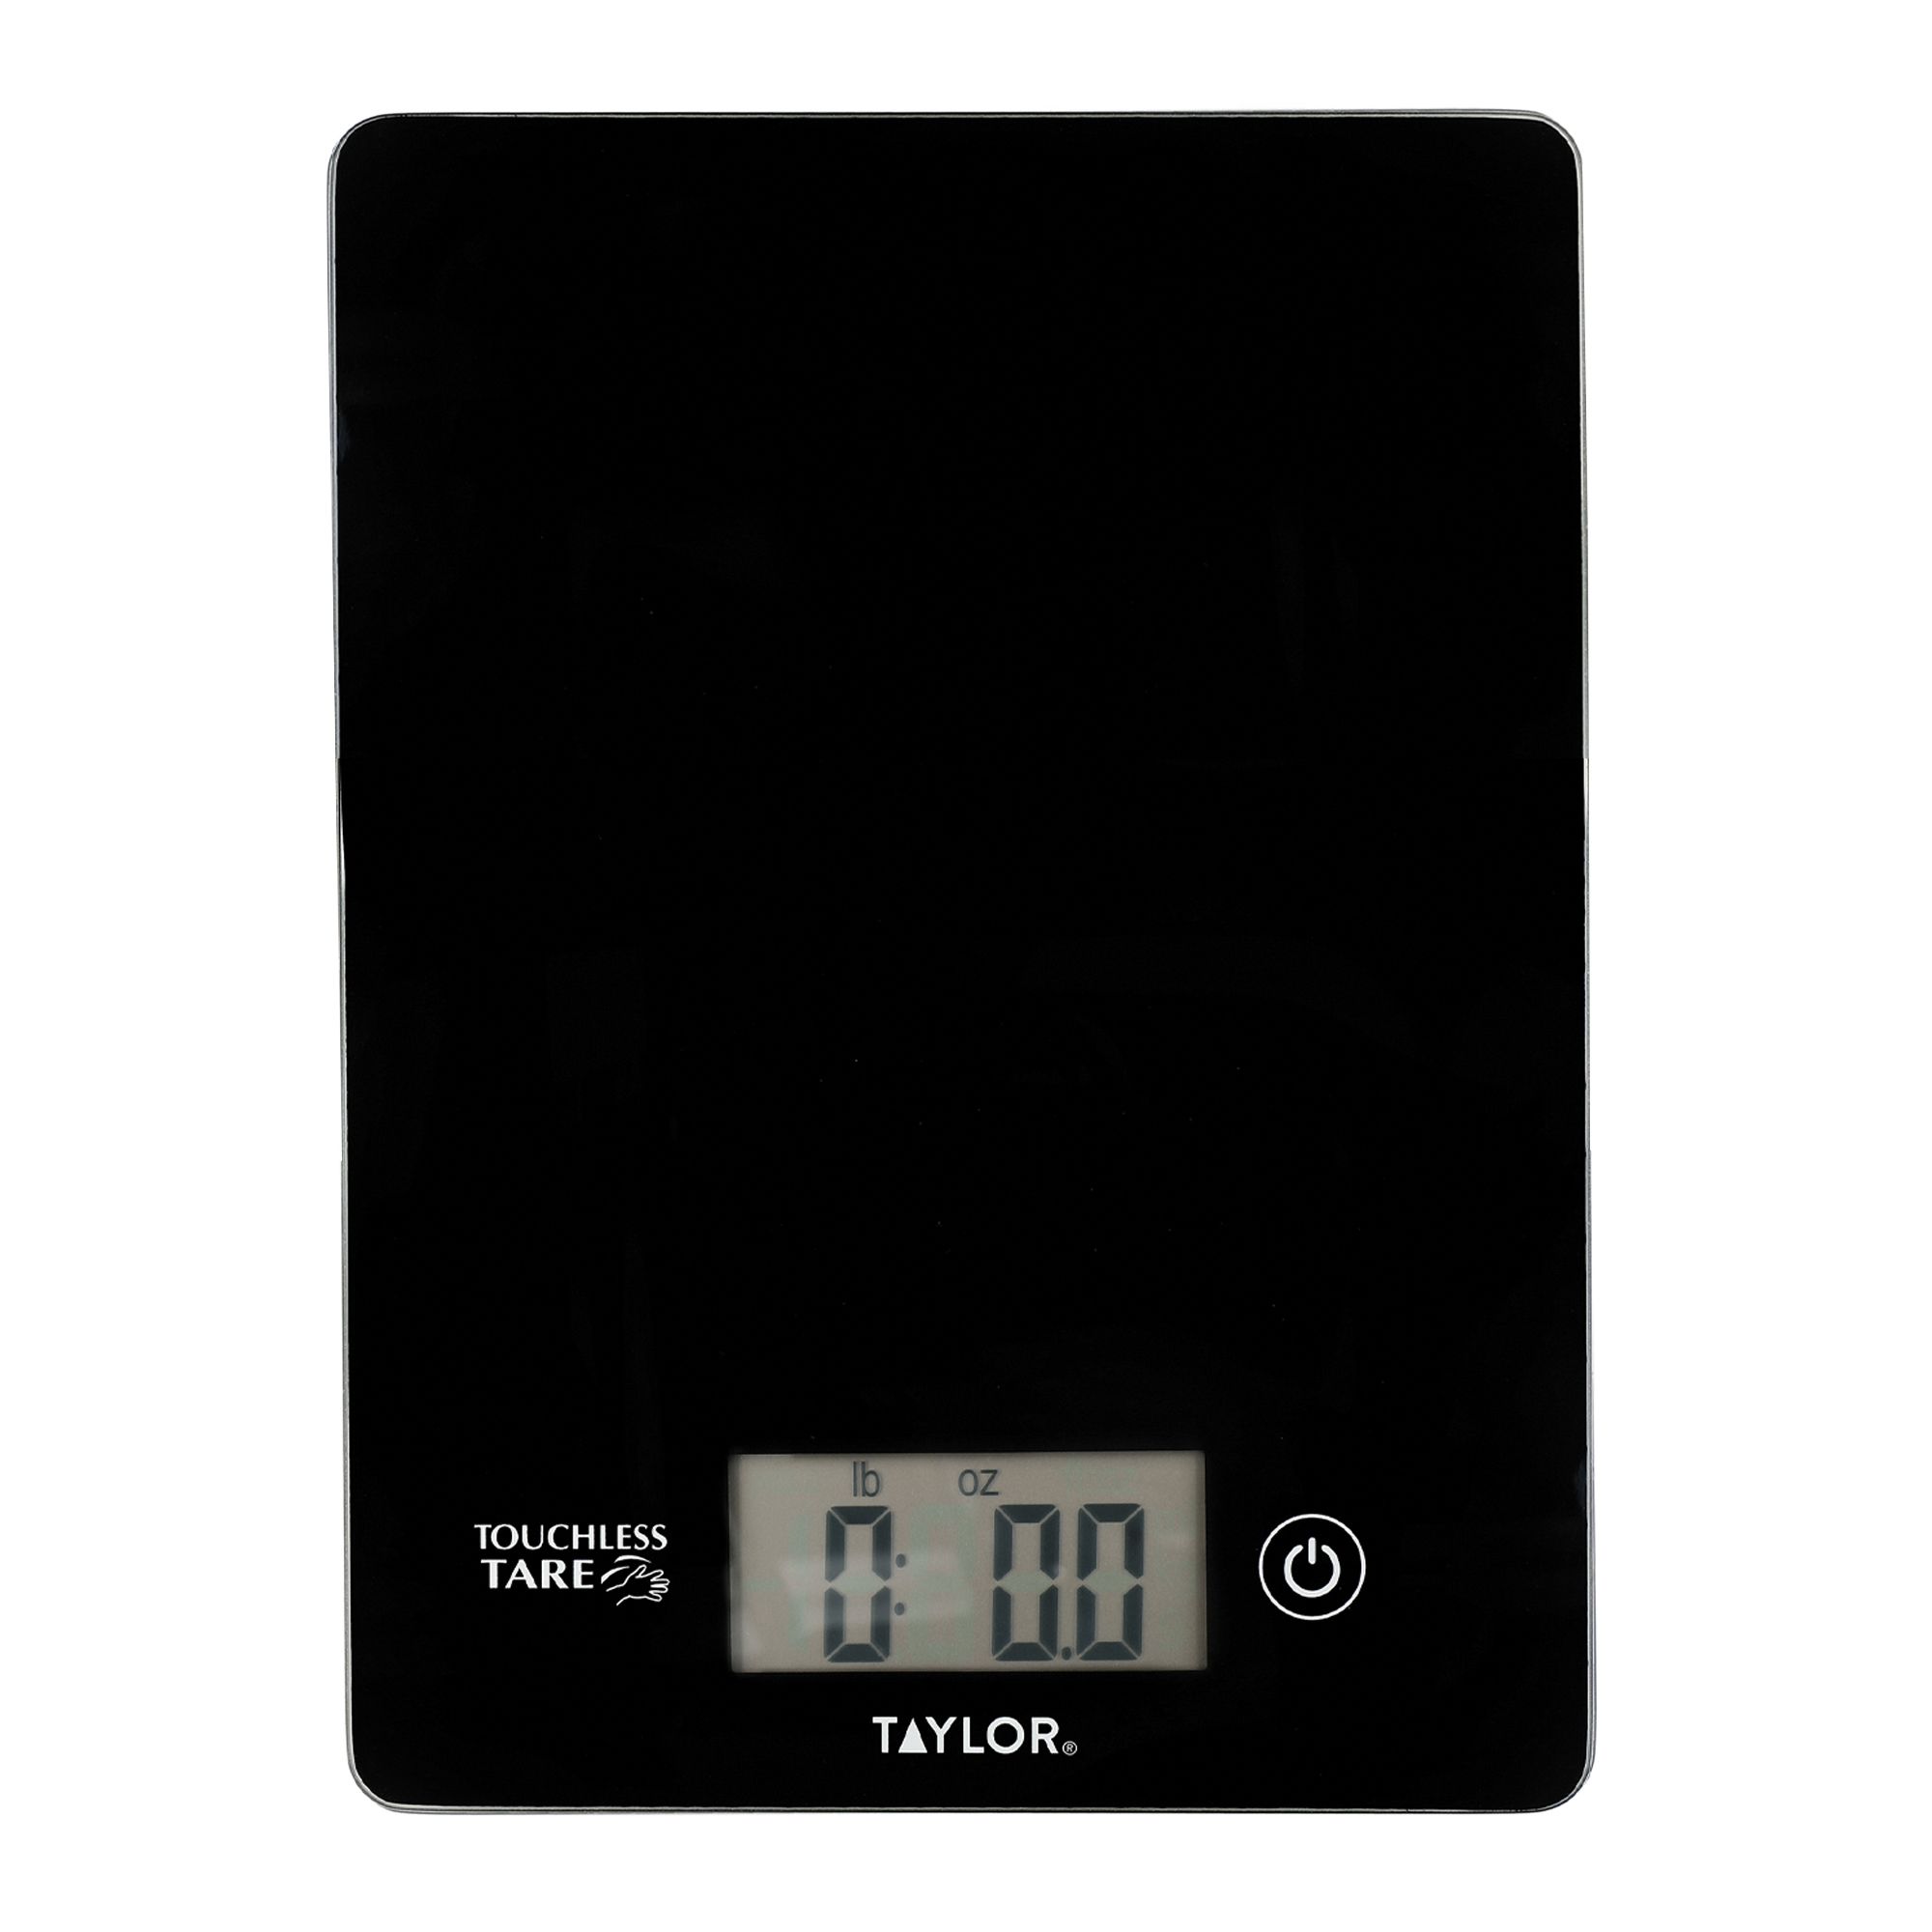 Taylor Pro Digital Cooking Scales with Touchless Tare, 5kg / 5000ml